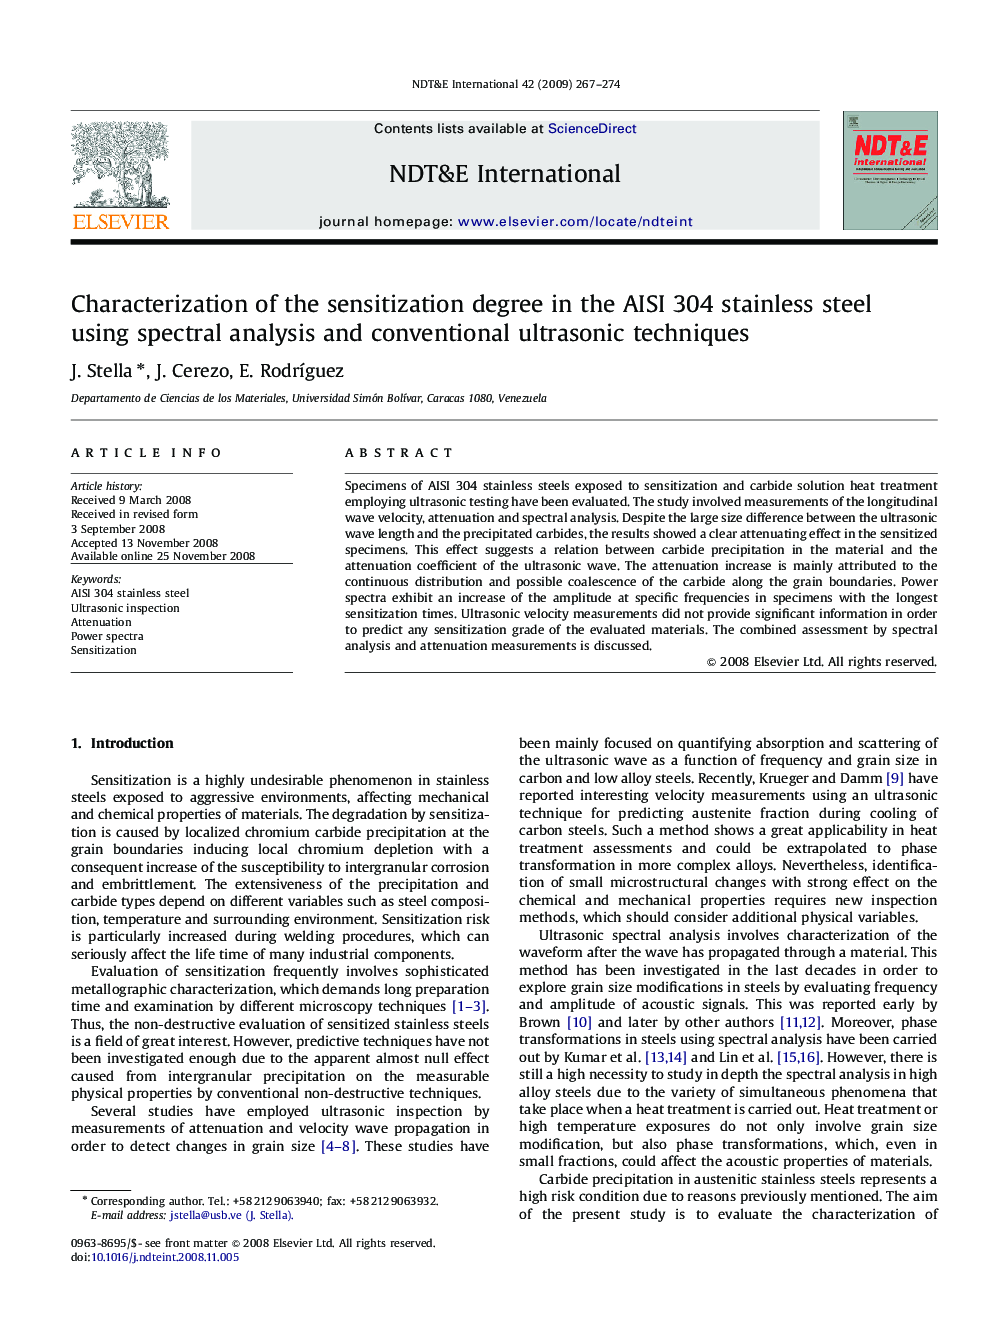 Characterization of the sensitization degree in the AISI 304 stainless steel using spectral analysis and conventional ultrasonic techniques